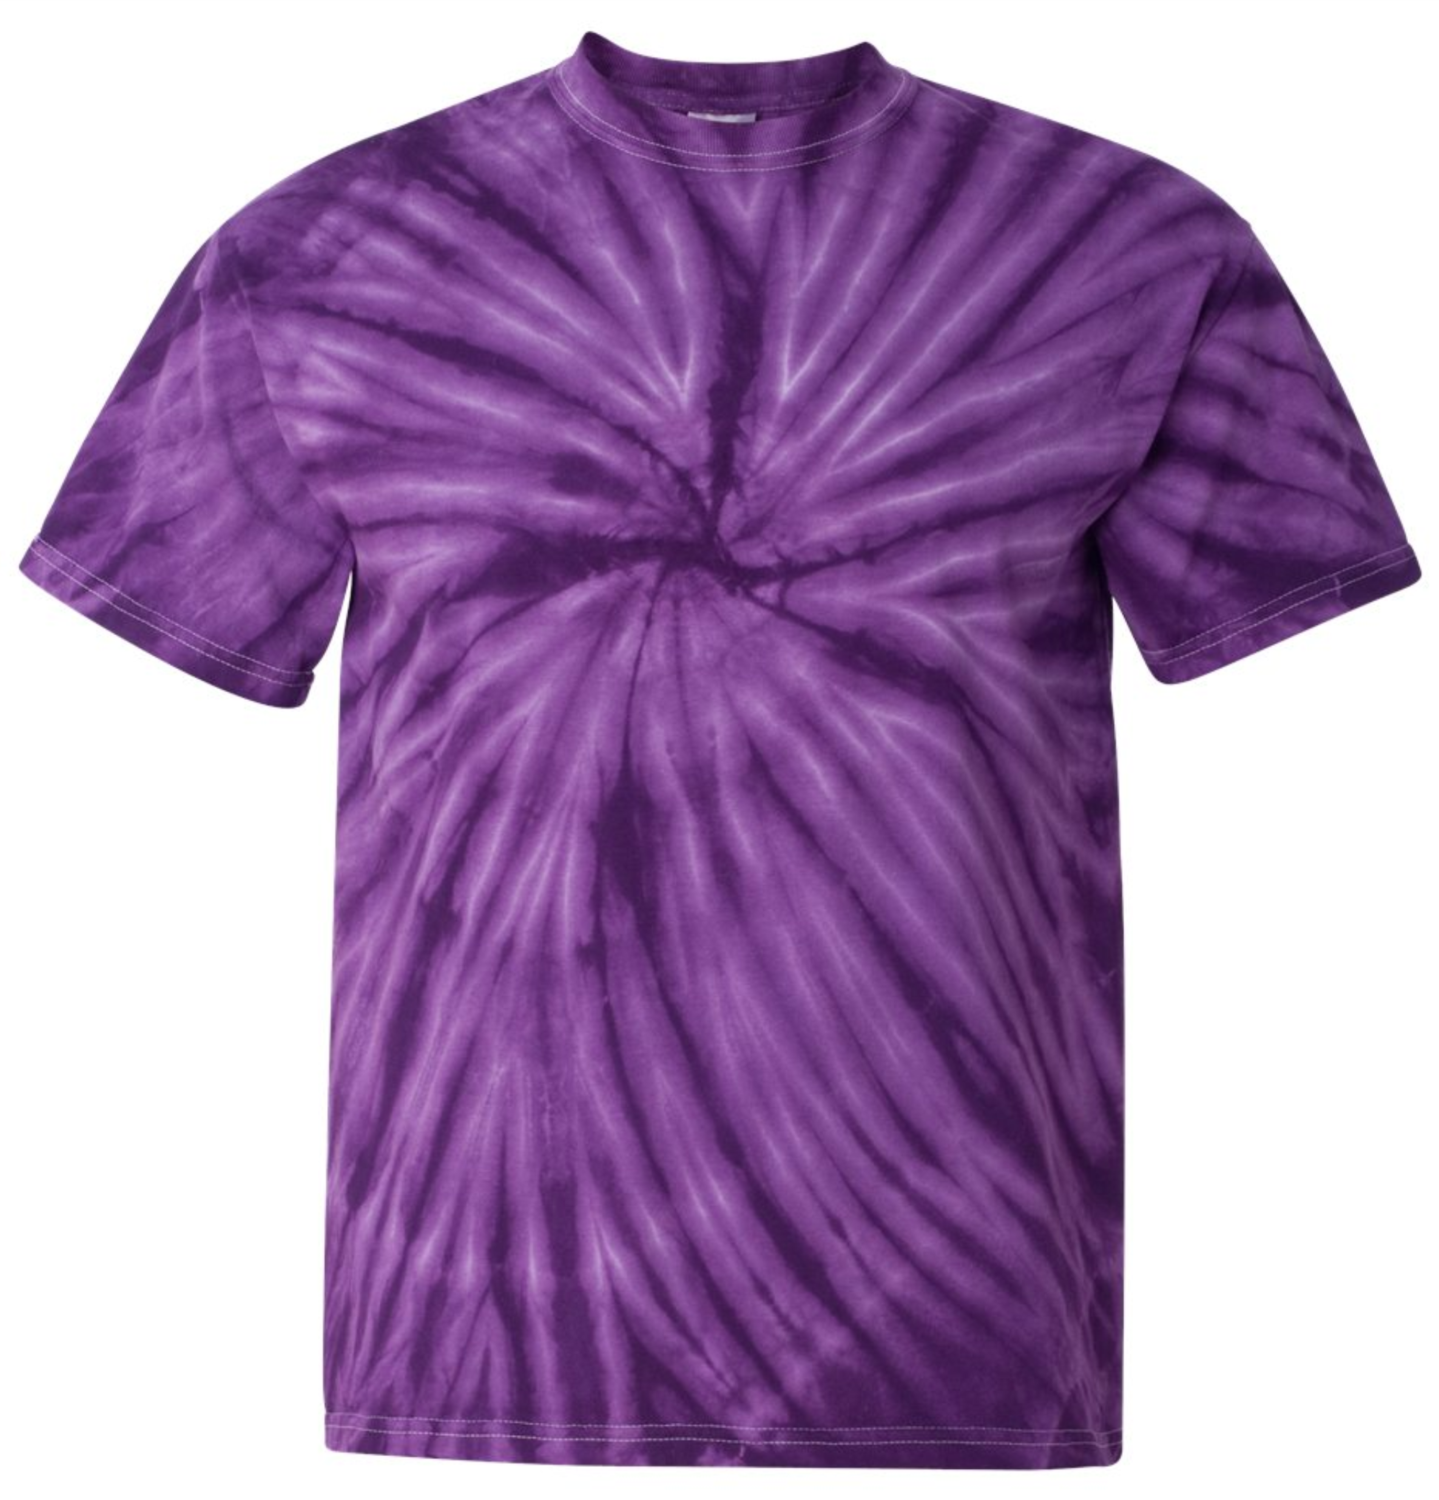 Purple Tie Dyed T-shirt